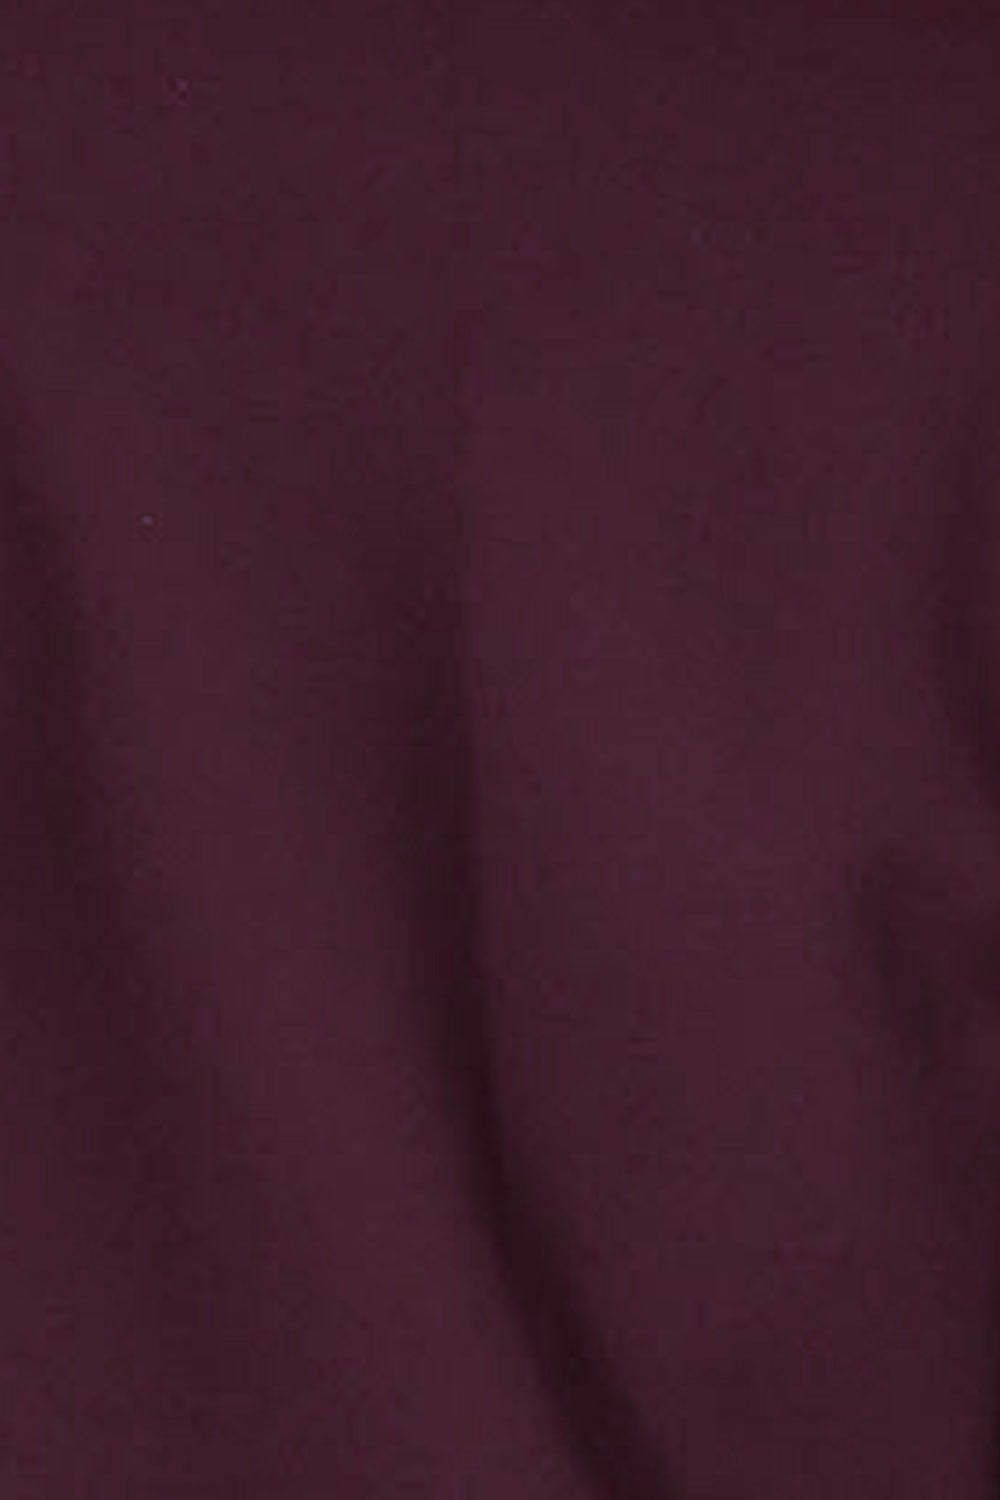 swatch of mulberry coloured ponte fabric used by Australian and New Zealand women's clothing brand, L&F to make a range of women's workwear pants and jackets. 